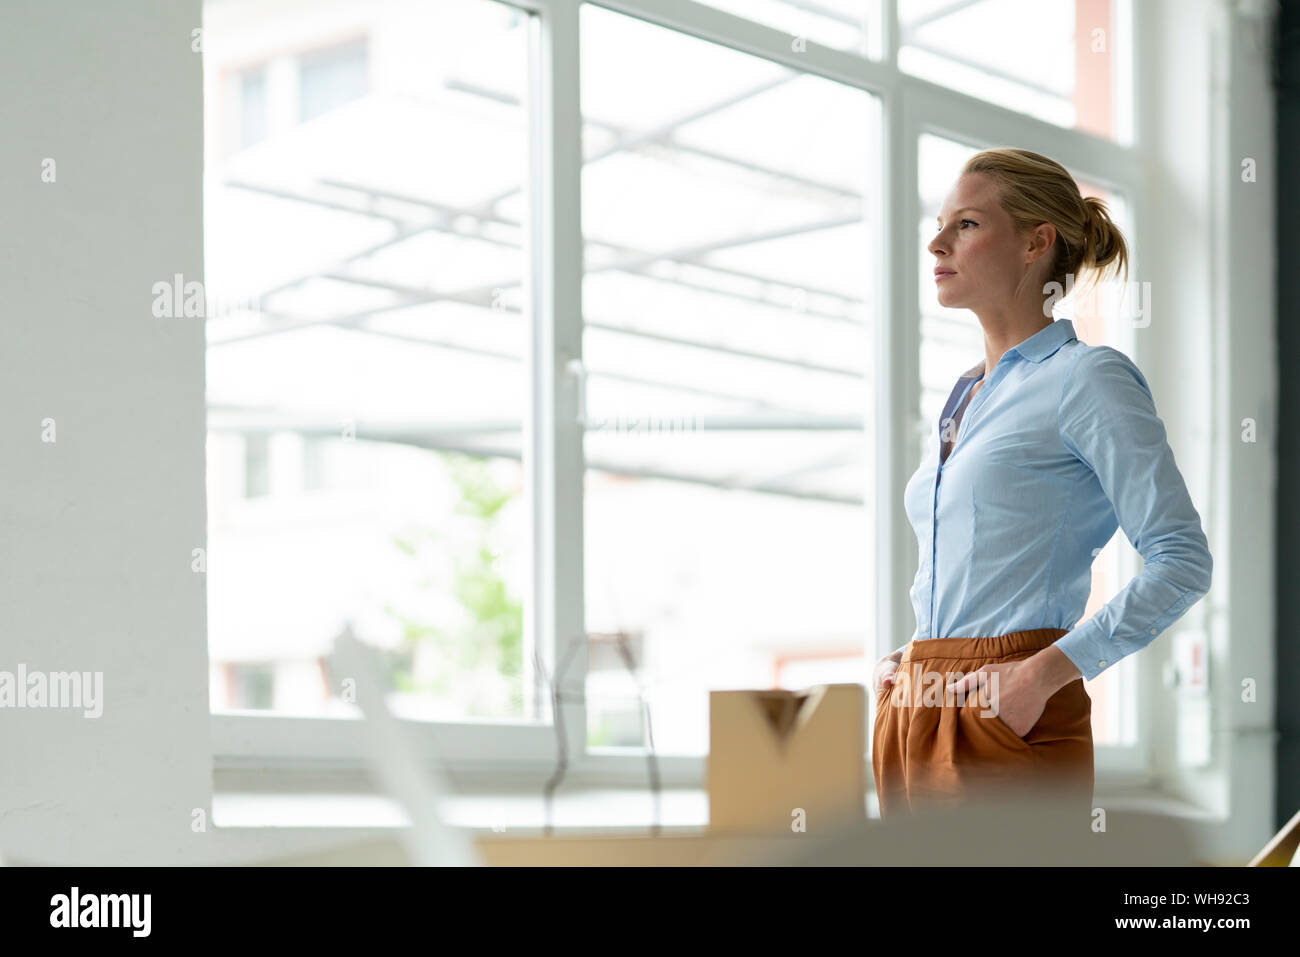 Serious young woman in office with architectural model on desk Stock Photo